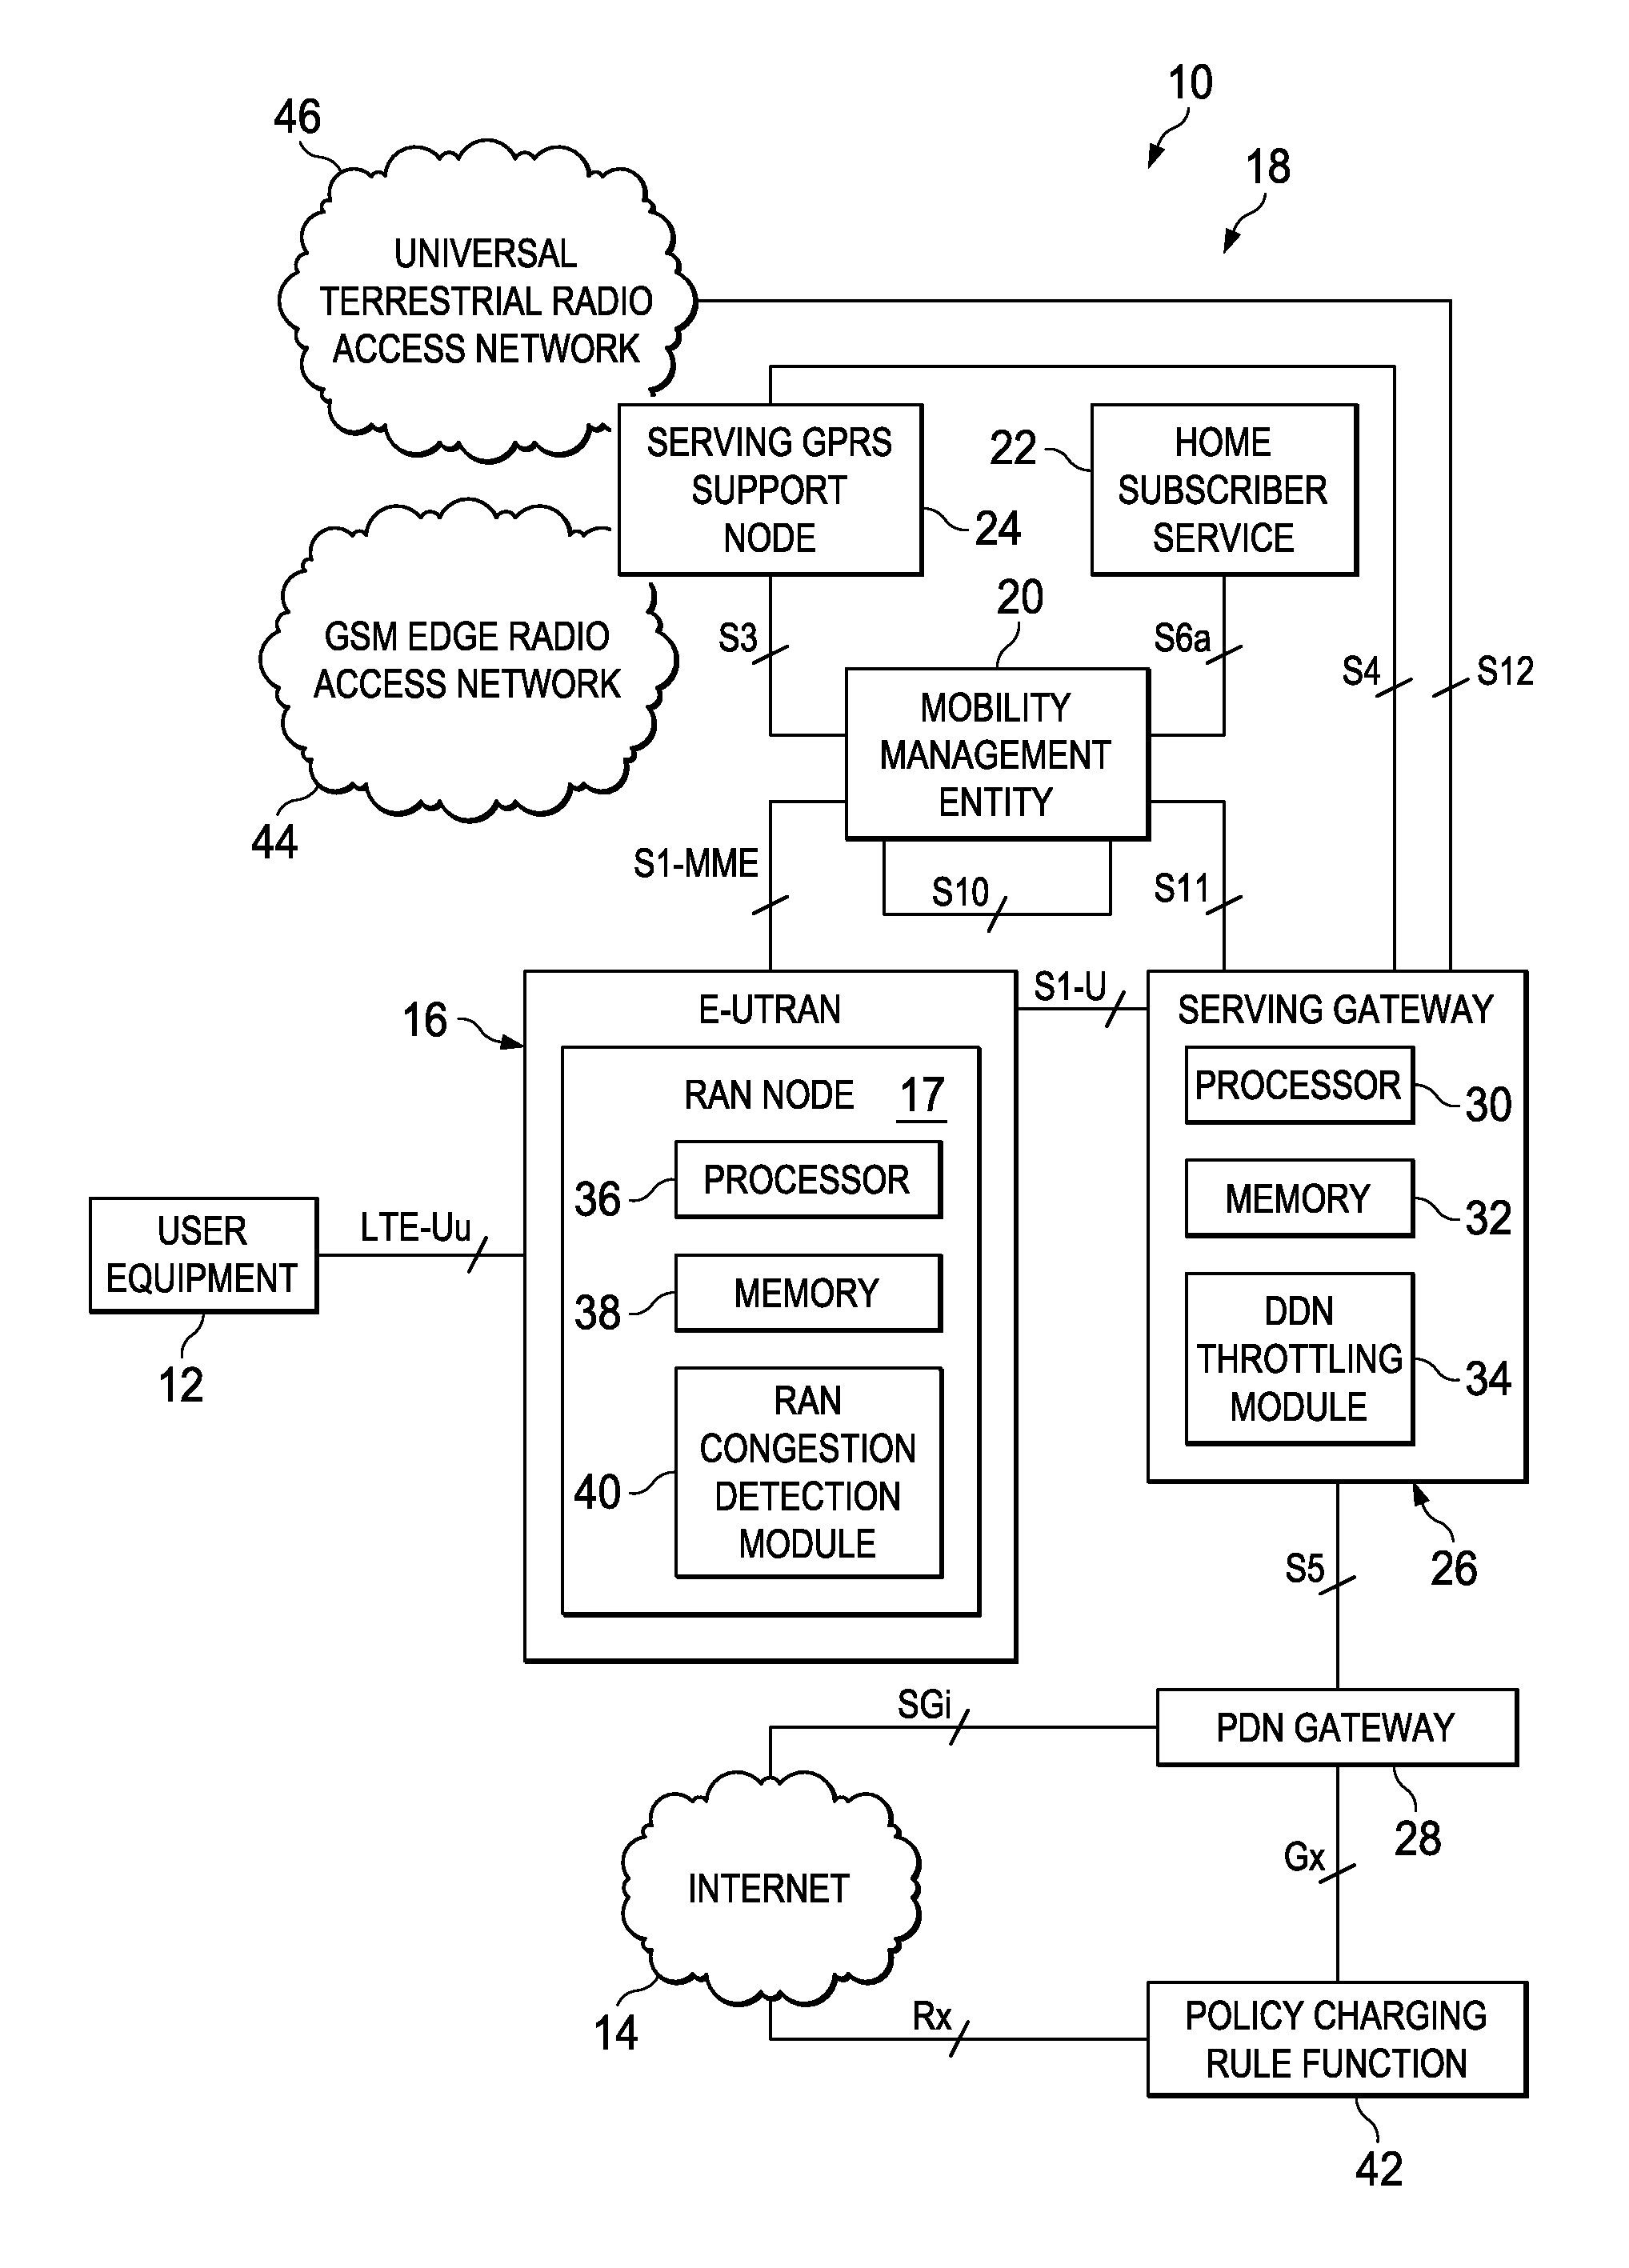 System and method for throttling downlink data notifications in a network environment